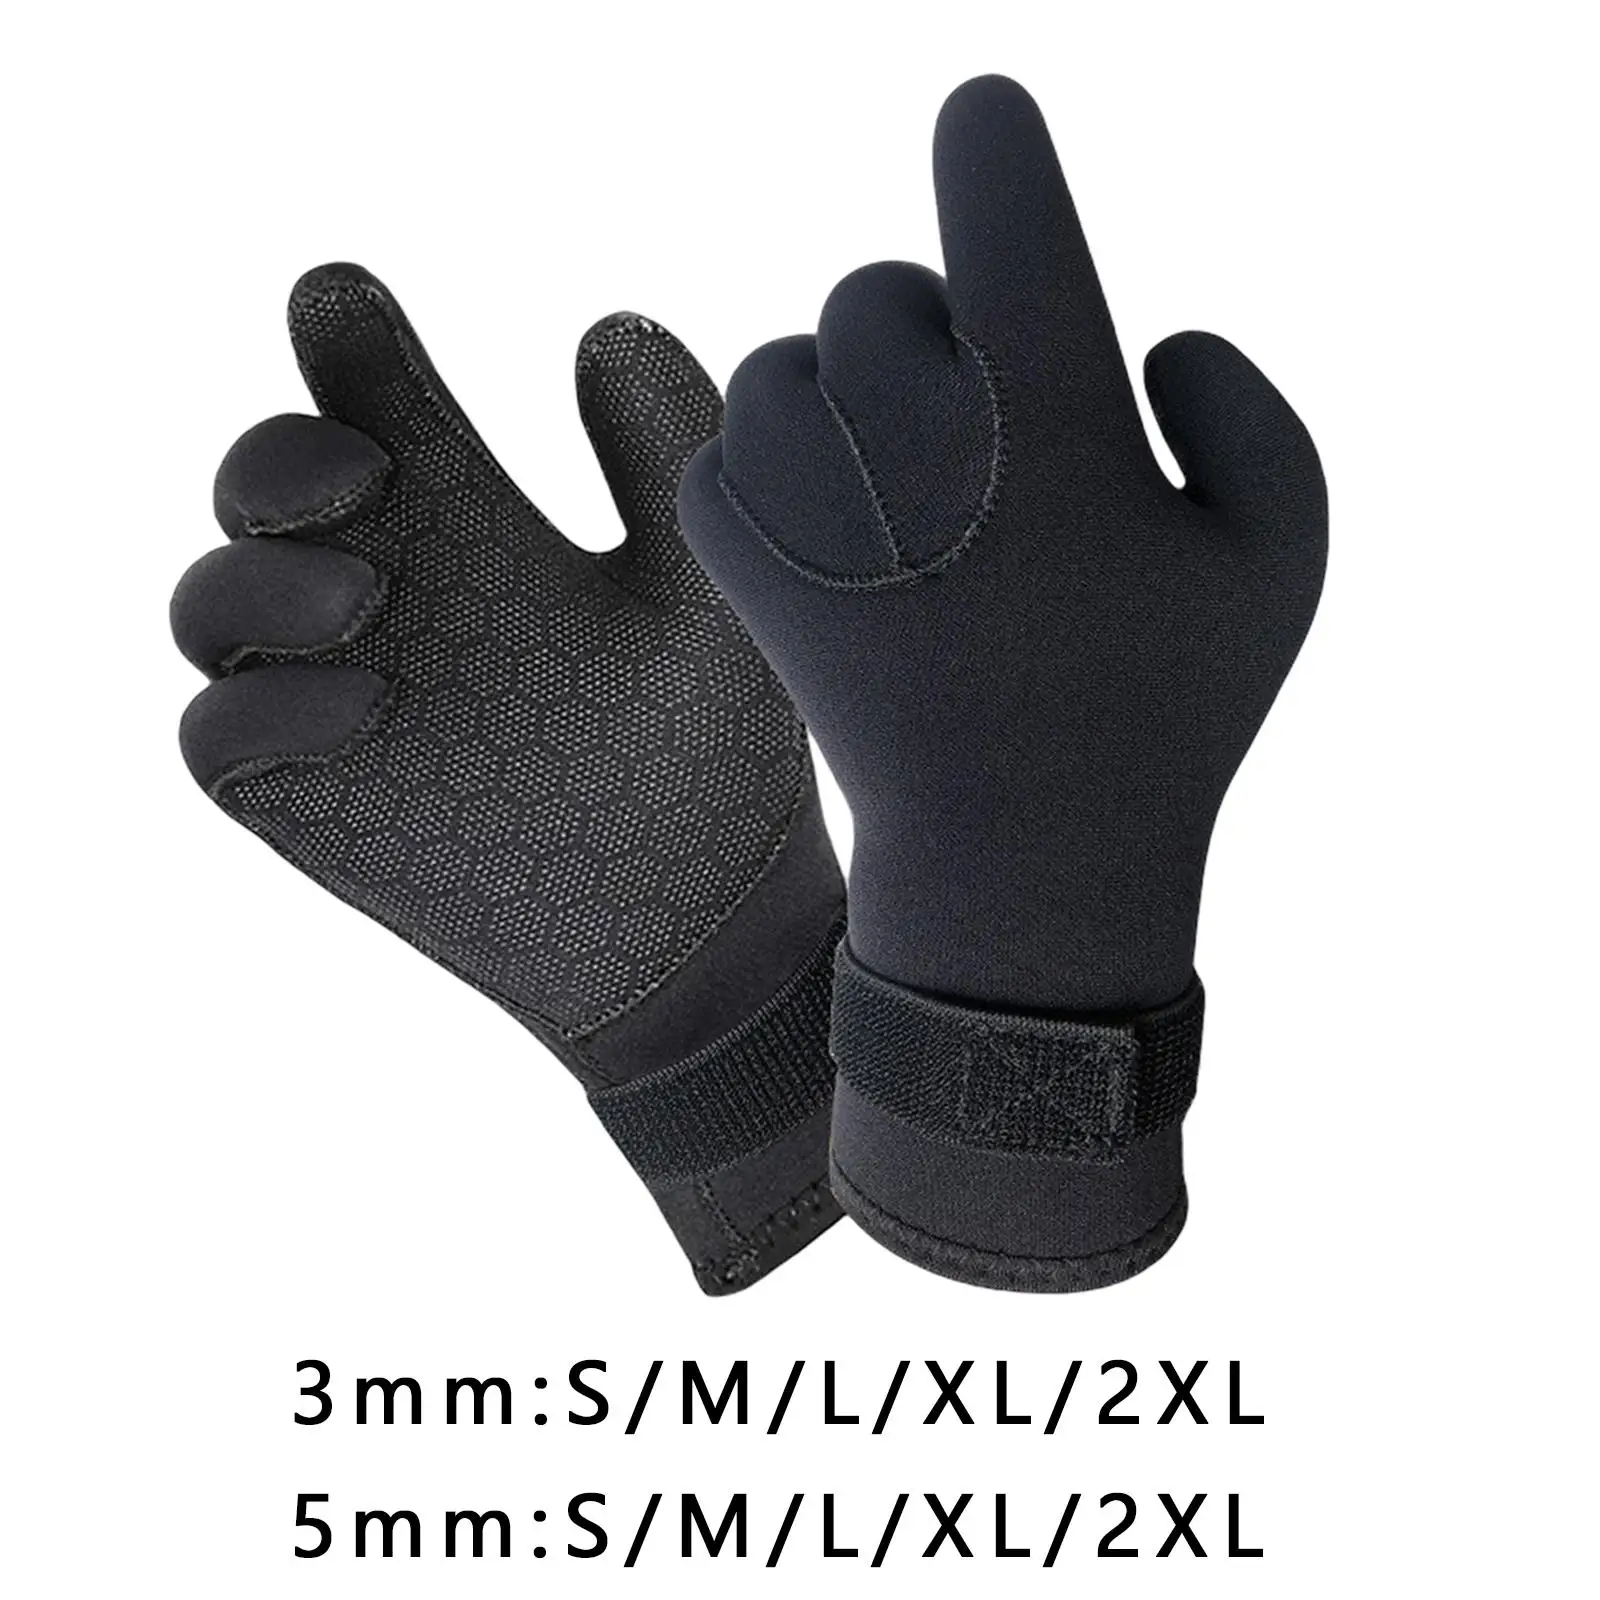 Diving Gloves Thermal Wetsuit Gloves Men Women Non Slip Dive Gloves for Swimming Spearfishing Snorkeling Surfing Water Sports